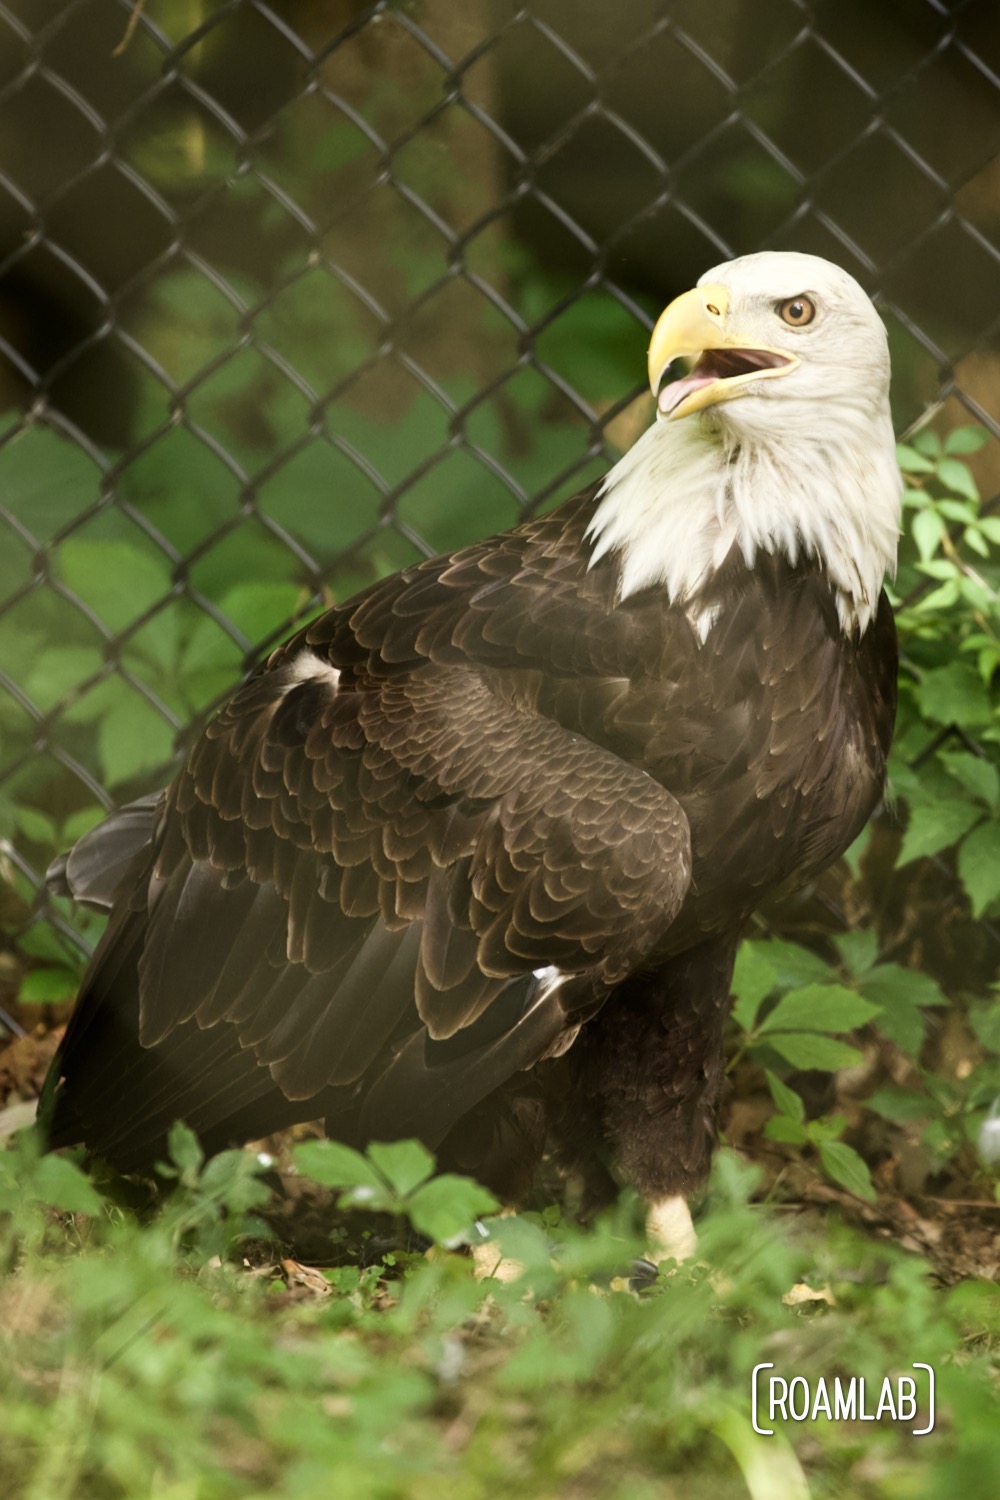 Injured bald eagle gingerly explores its fenced in enclosure by foot.